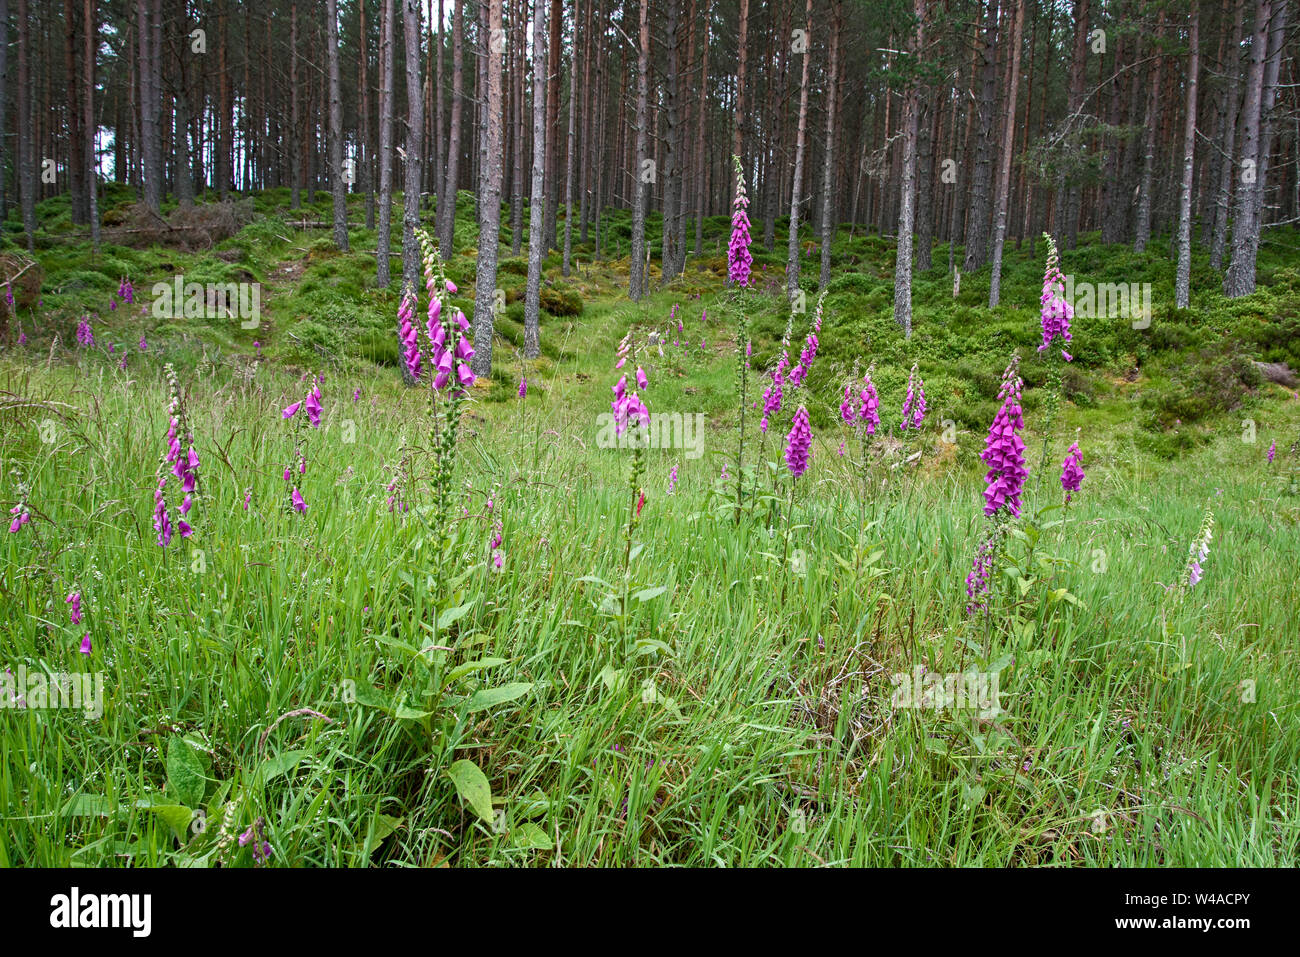 Foxgloves (digitalis) growing in Rothiemurchus Forest in the Cairngorms National Park, Scotland, UK. Stock Photo